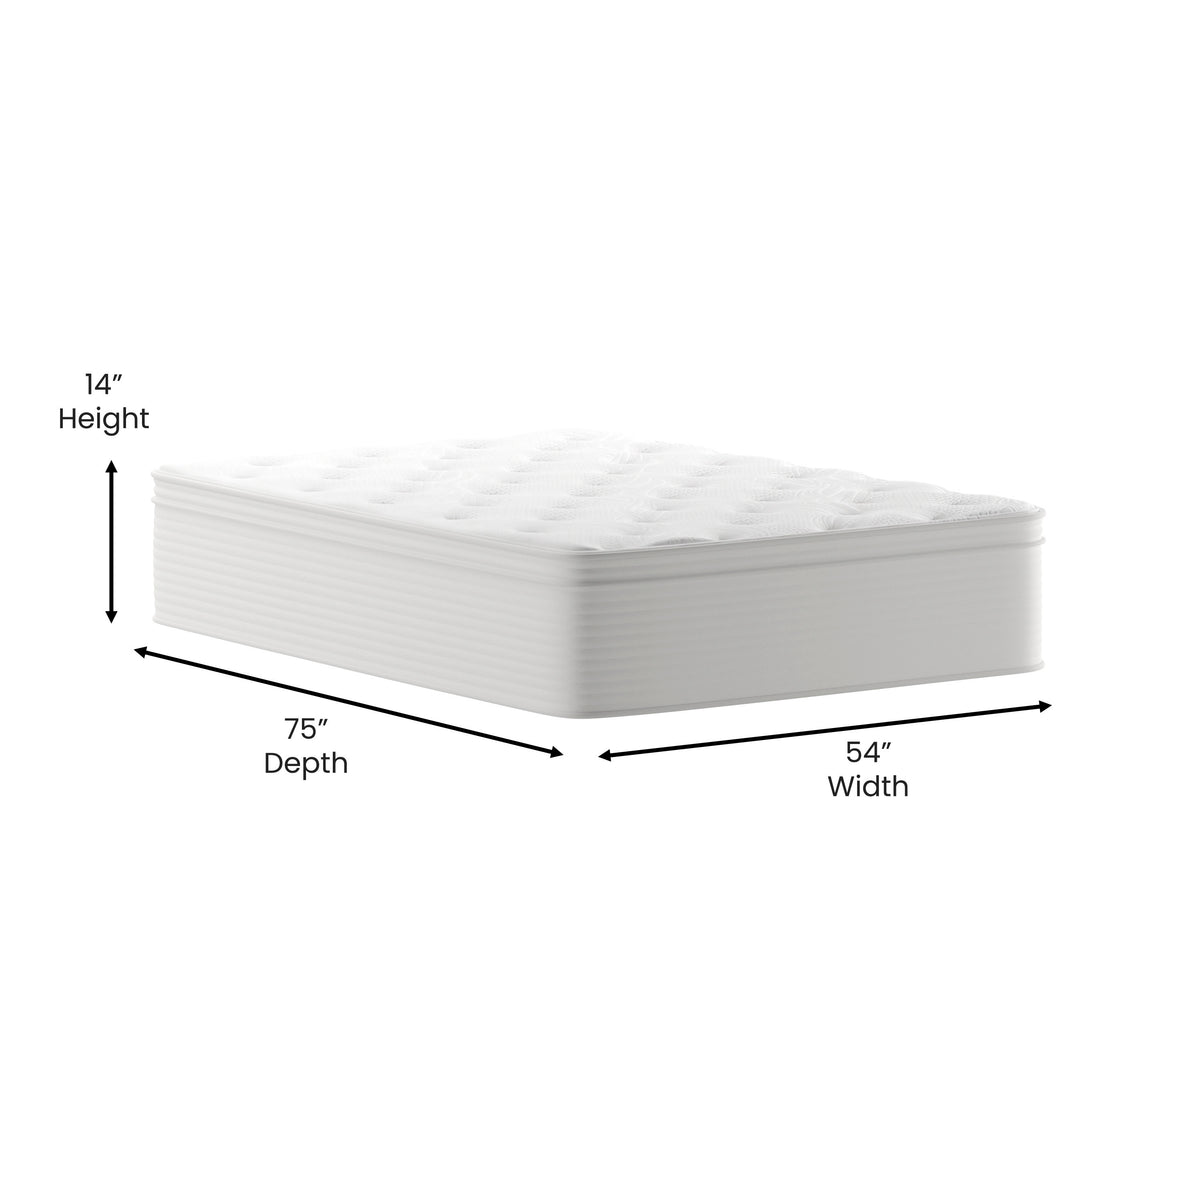 Full |#| Commercial 14 Inch Memory Foam and Pocket Spring Hybrid Mattress in a Box - Full